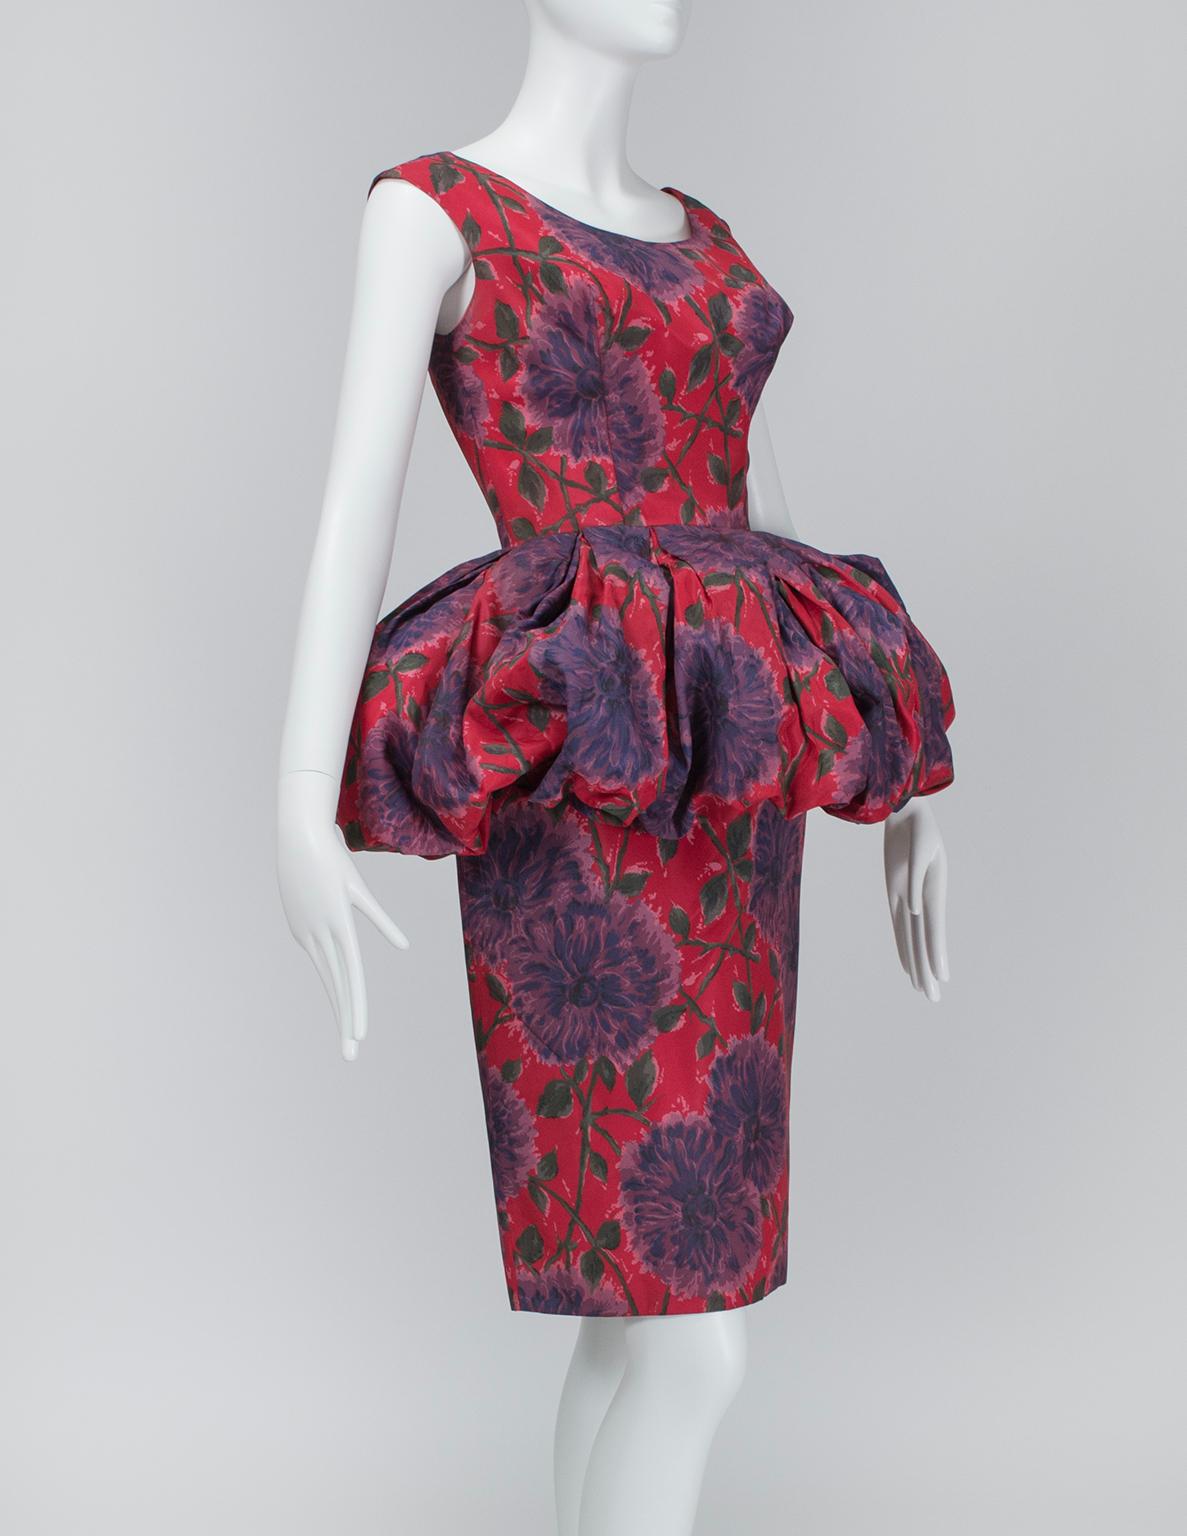 Less a peplum and more a Renaissance-era farthingale, this dress's midsection uses an optical illusion to slim the waist and hips by comparison. Entrance- AND exit-making.

Vintage sleeveless sheath dress with wide scooping neckline and front and